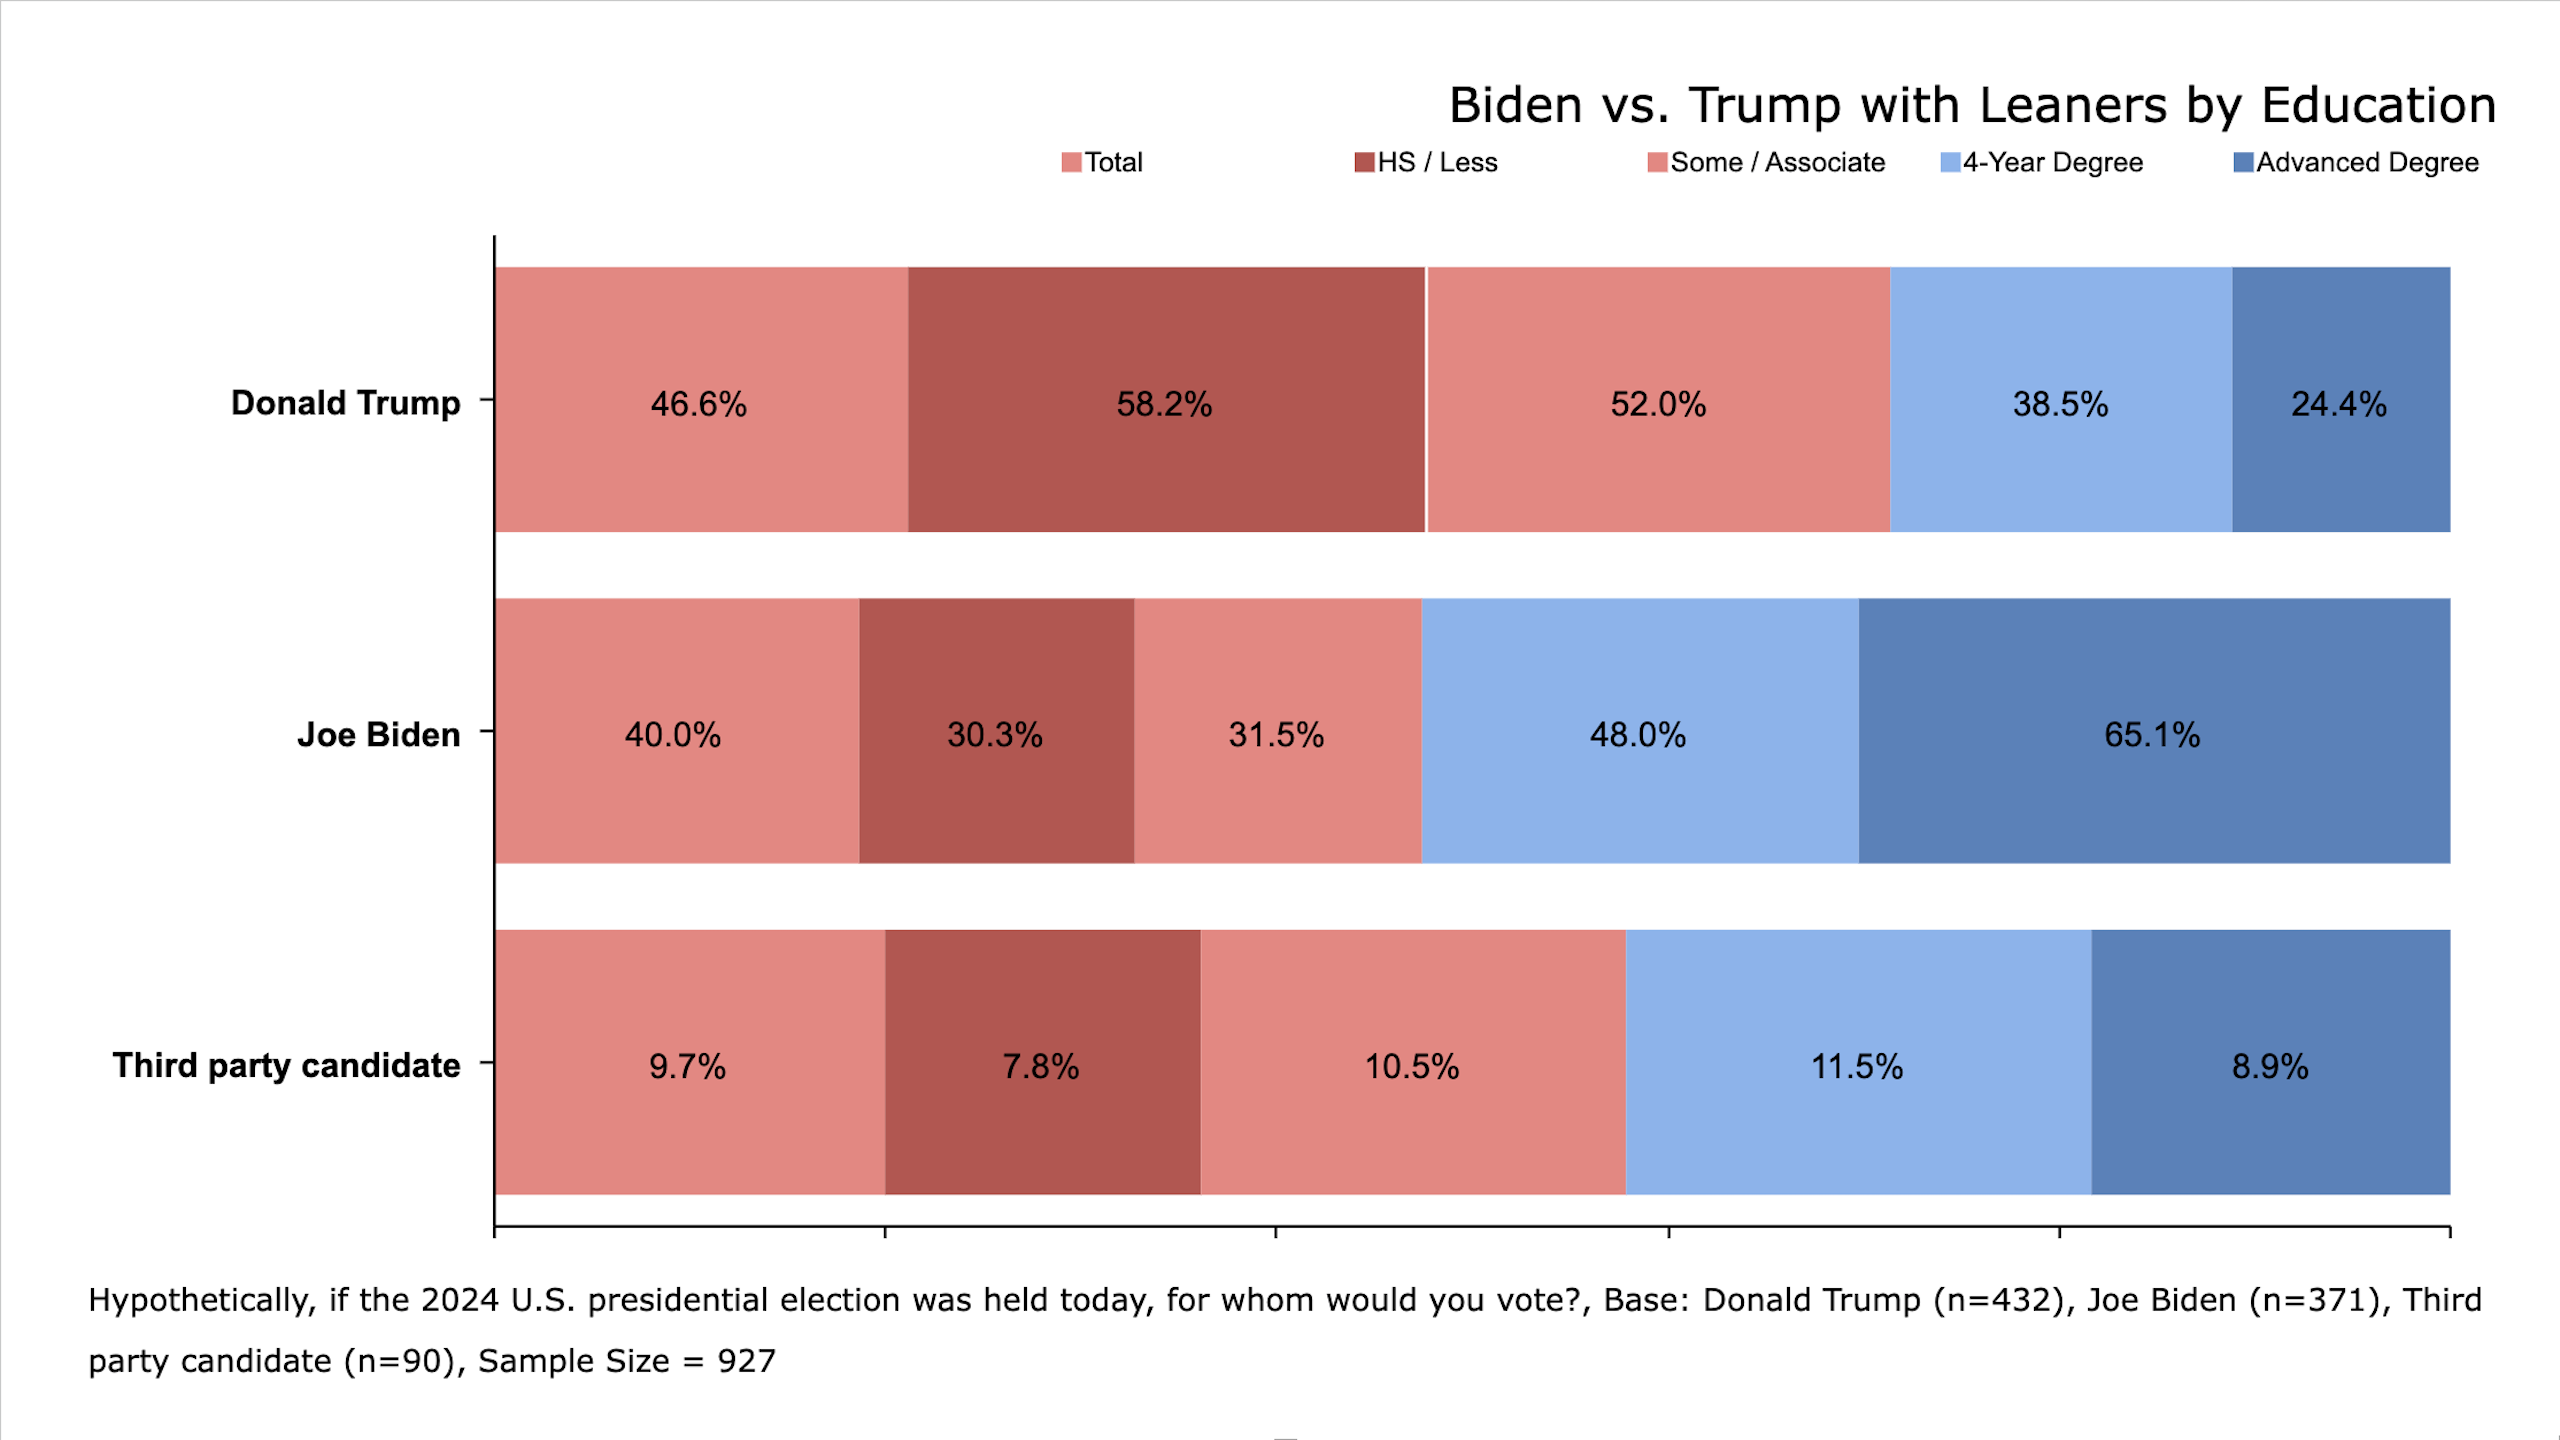 Source: Pennsylvania CD Media Big Data Poll Biden vs Trump with Leaners By Education